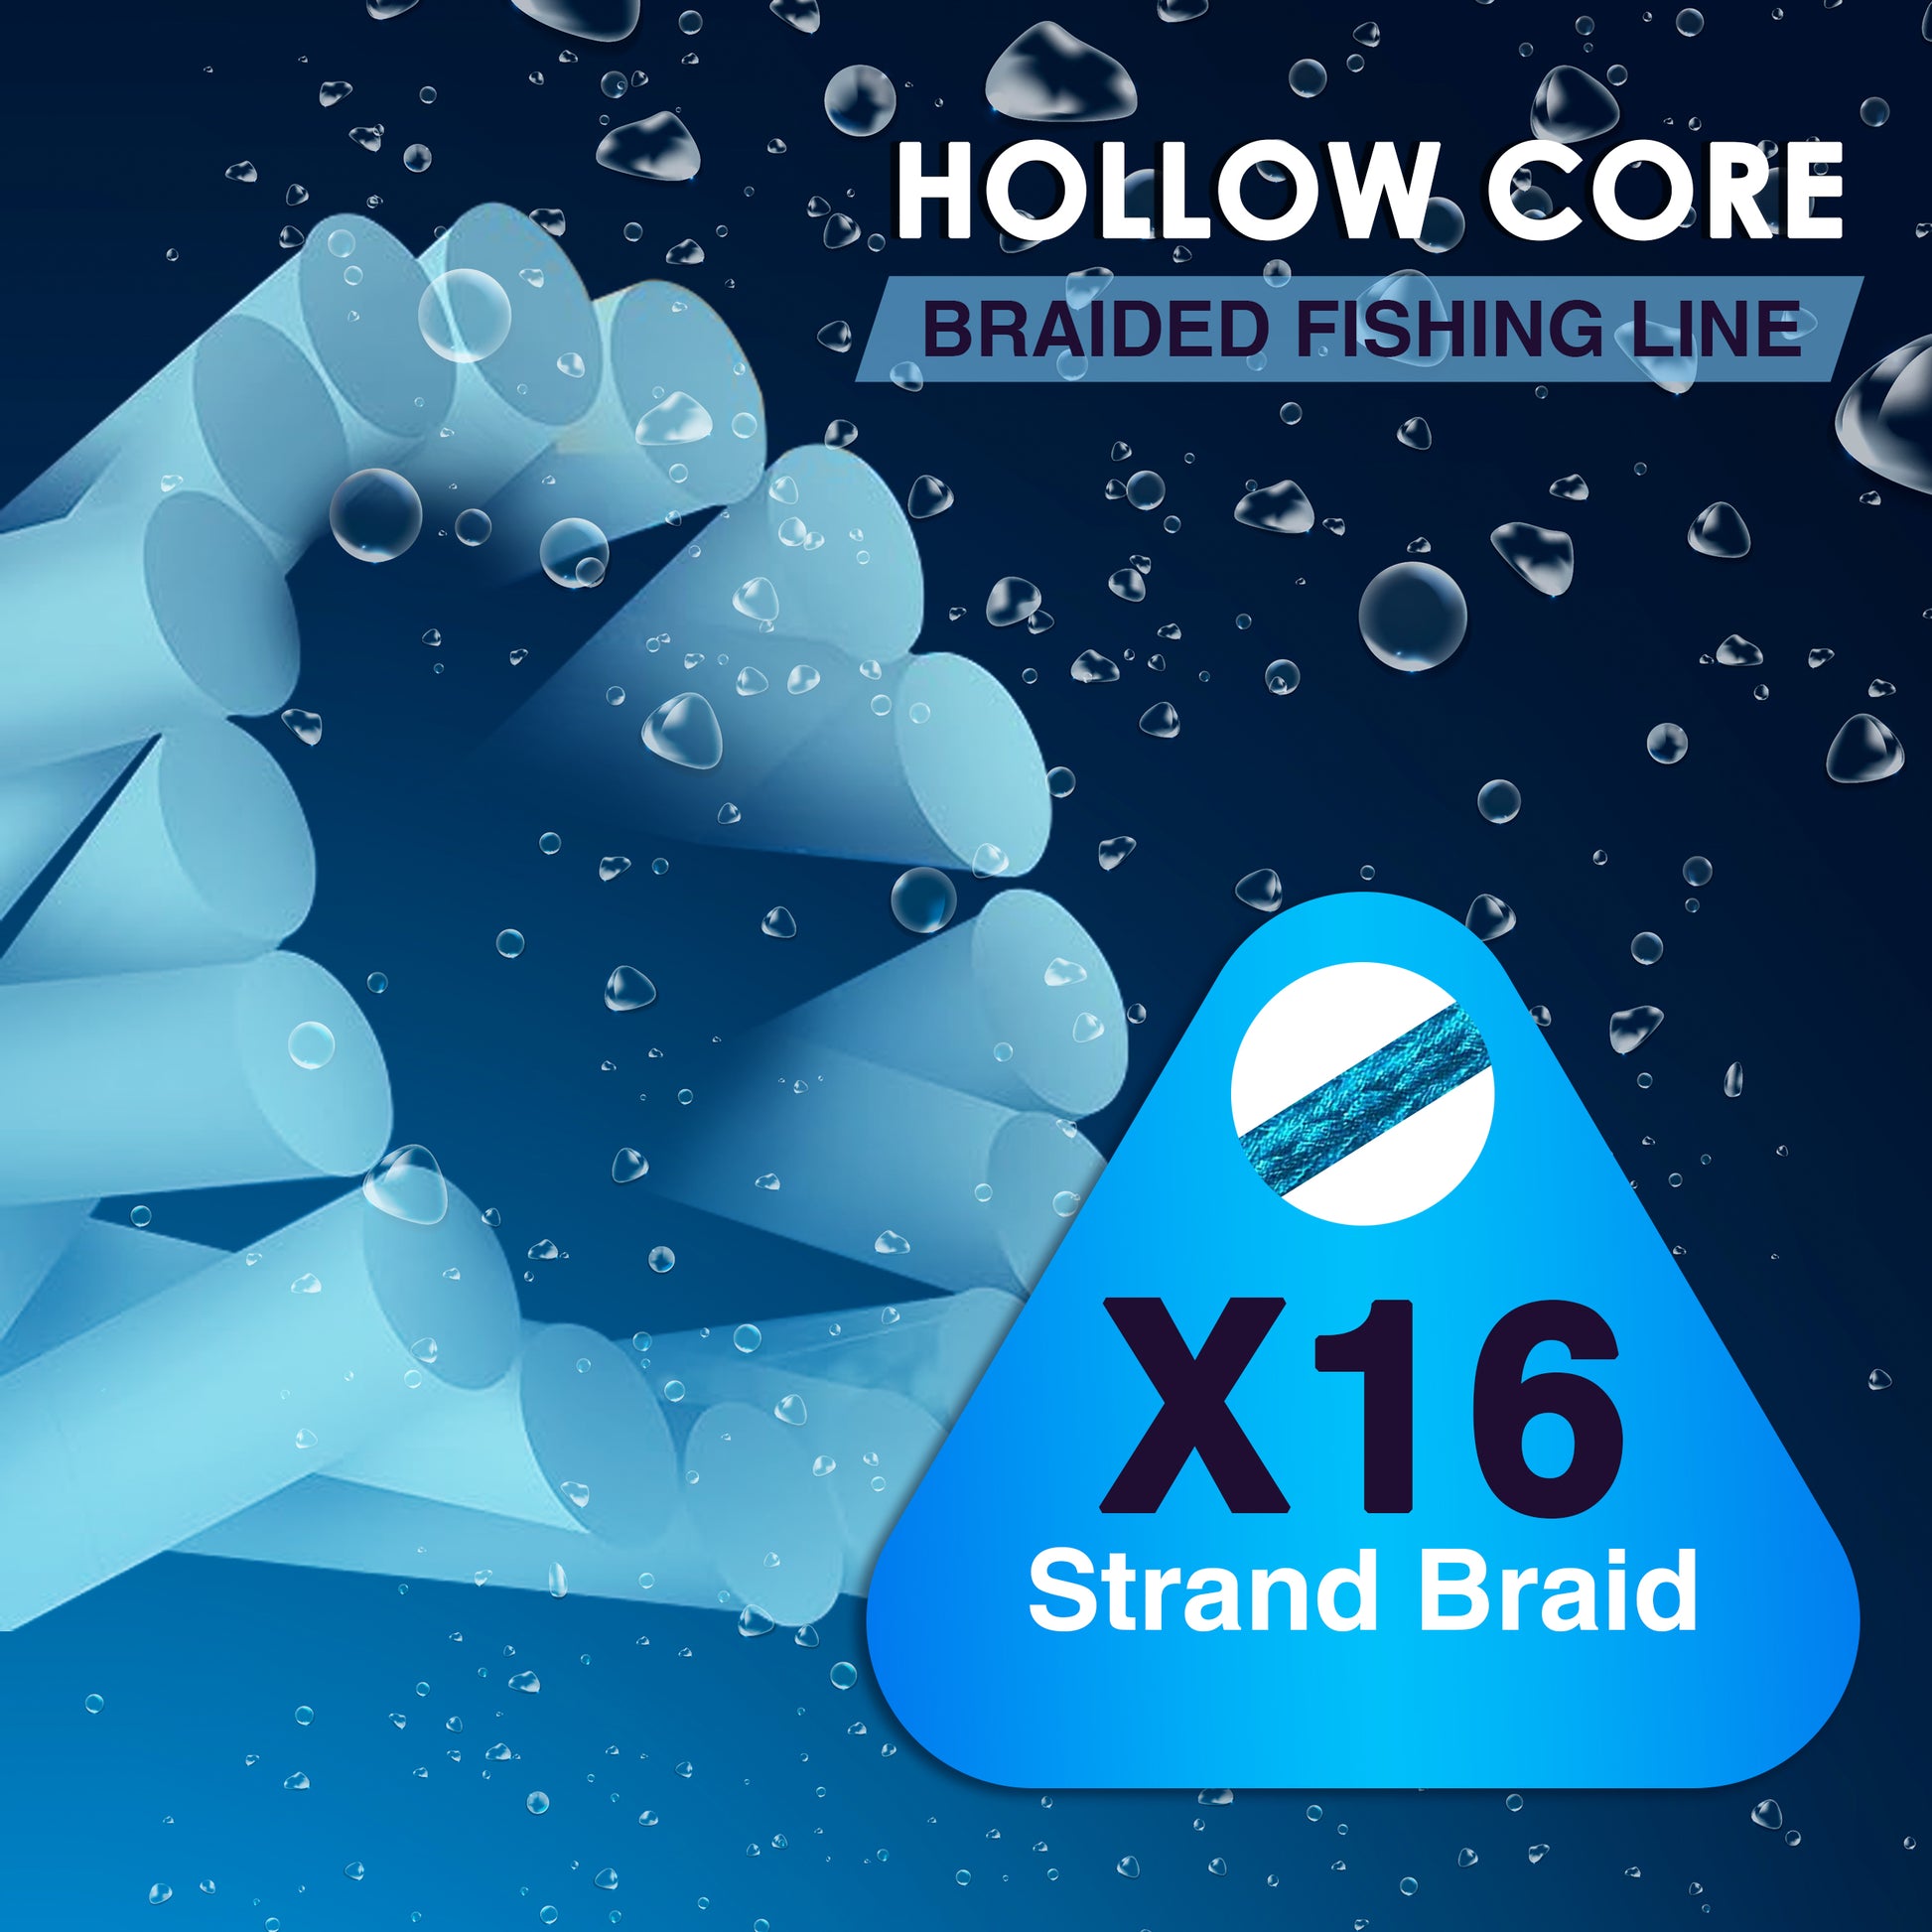 SEAGUAR LAUNCHES NEW ULTRA-STRONG 16-STRAND HOLLOW-CORE BRAID - Fishing  Tackle Retailer - The Business Magazine of the Sportfishing Industry